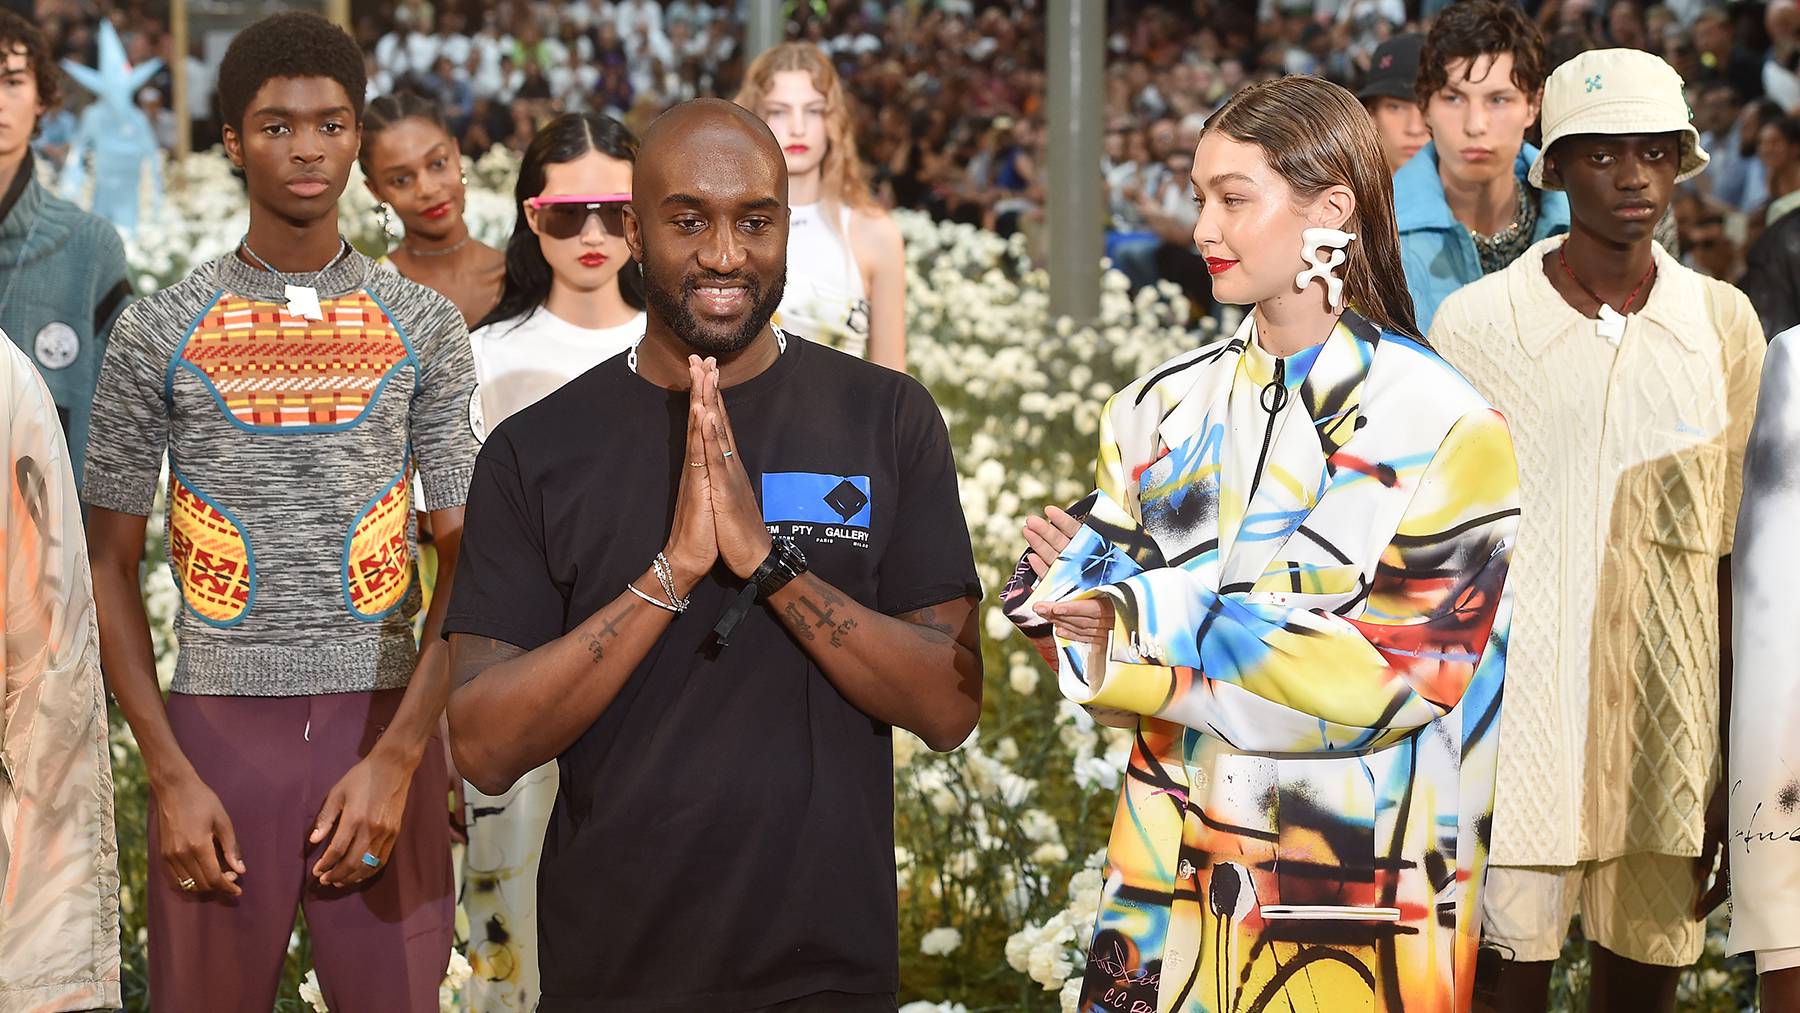 Virgil Abloh at the finale of a show standing in front of the models and beside Gigi Hadid.